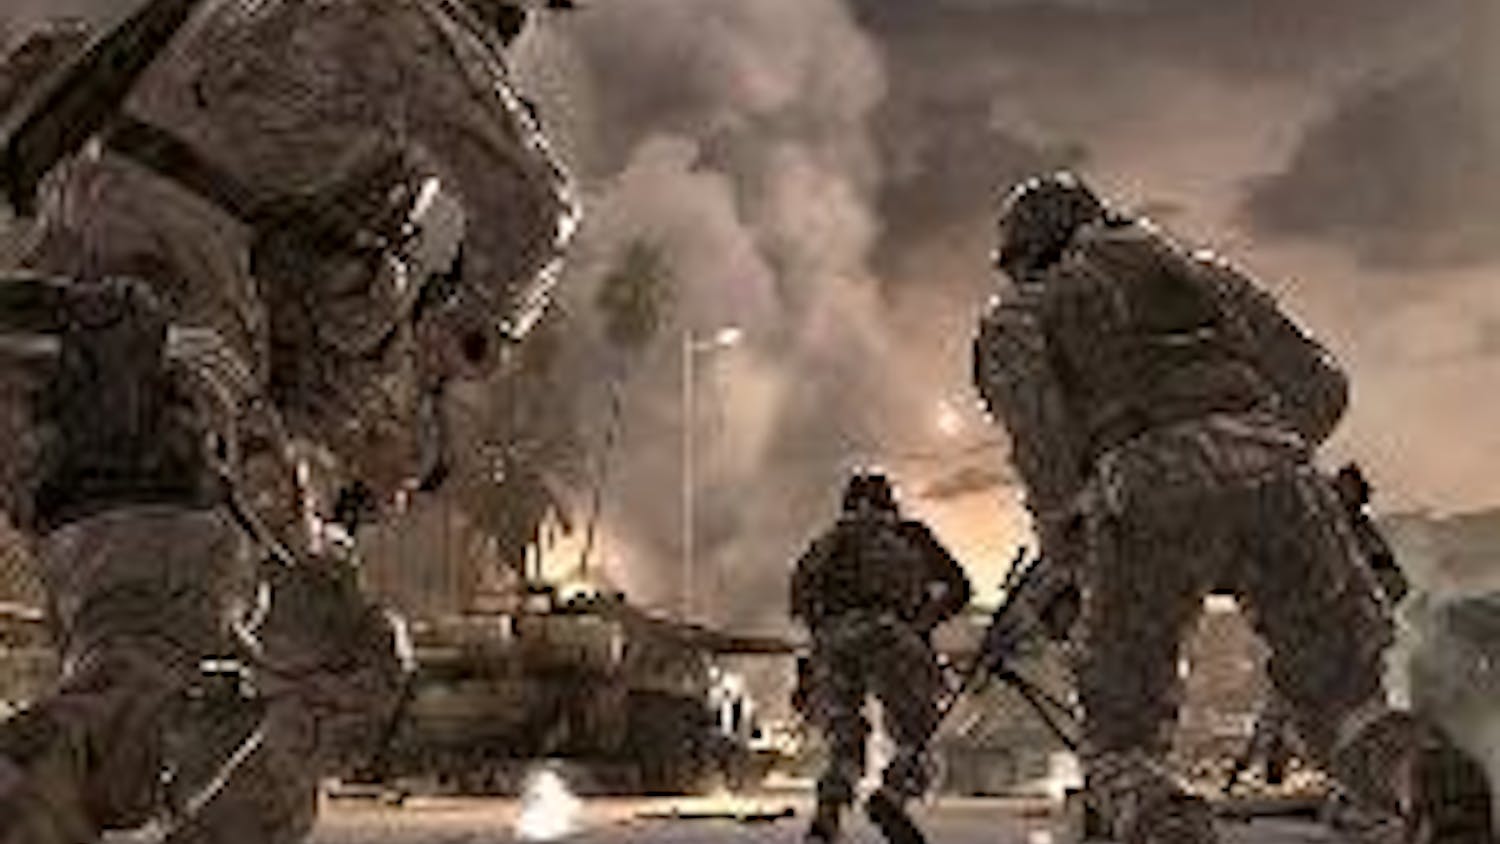 NO MAN LEFT BEHIND - U.S. soldiers charge into battle against ultranationalists, dictators and terrorists across the Middle East and Russia. The game's multiplayer feature tests gamers' battle strategies.